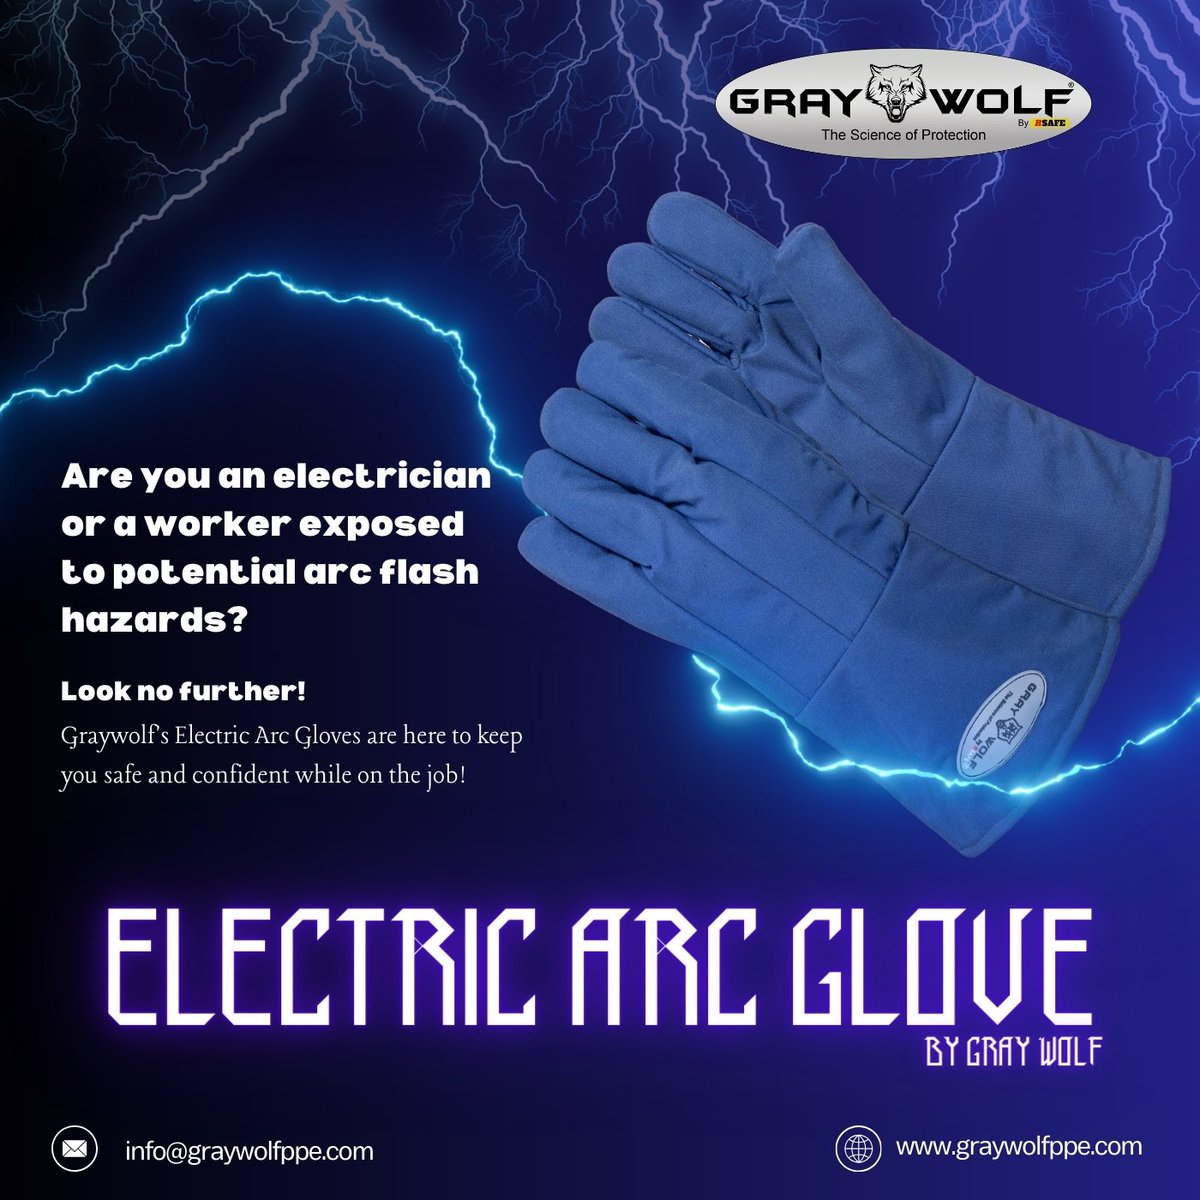 Introducing Graywolf's Electric Arc flash Gloves: Your Ultimate Protection Against Arc Hazards!

Are you an electrician or a worker exposed to potential arc flash hazards? Look no further! Graywolf's Electric Arc Gloves are here to keep you safe and confident while on the job